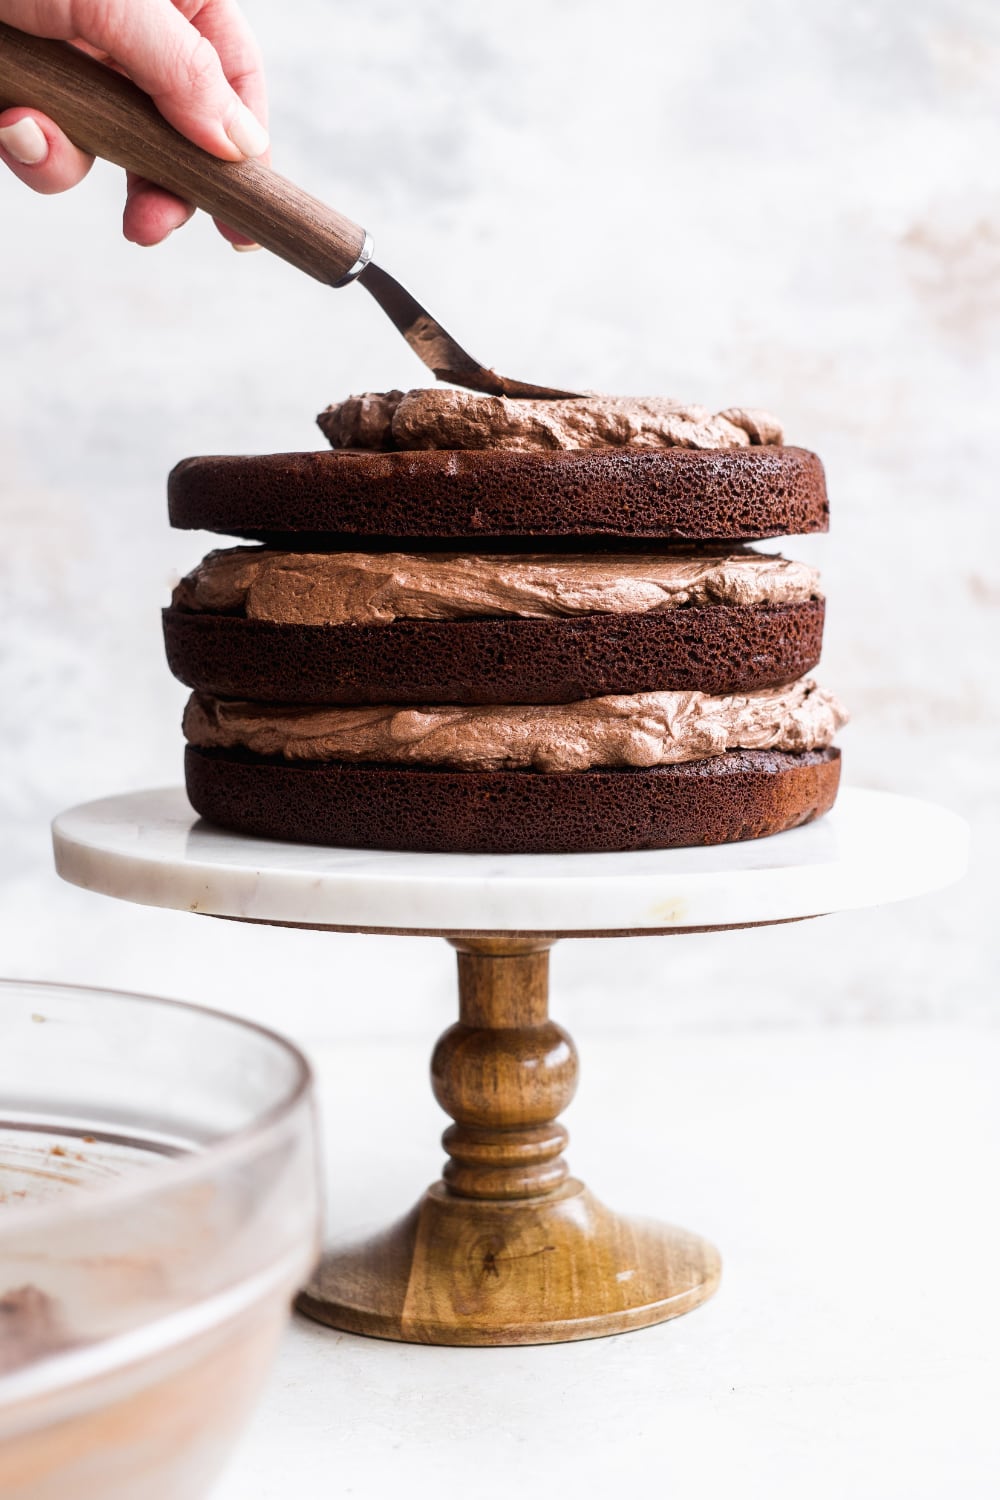 three paleo chocolate cake layers stacked with paleo frosting in between each layer